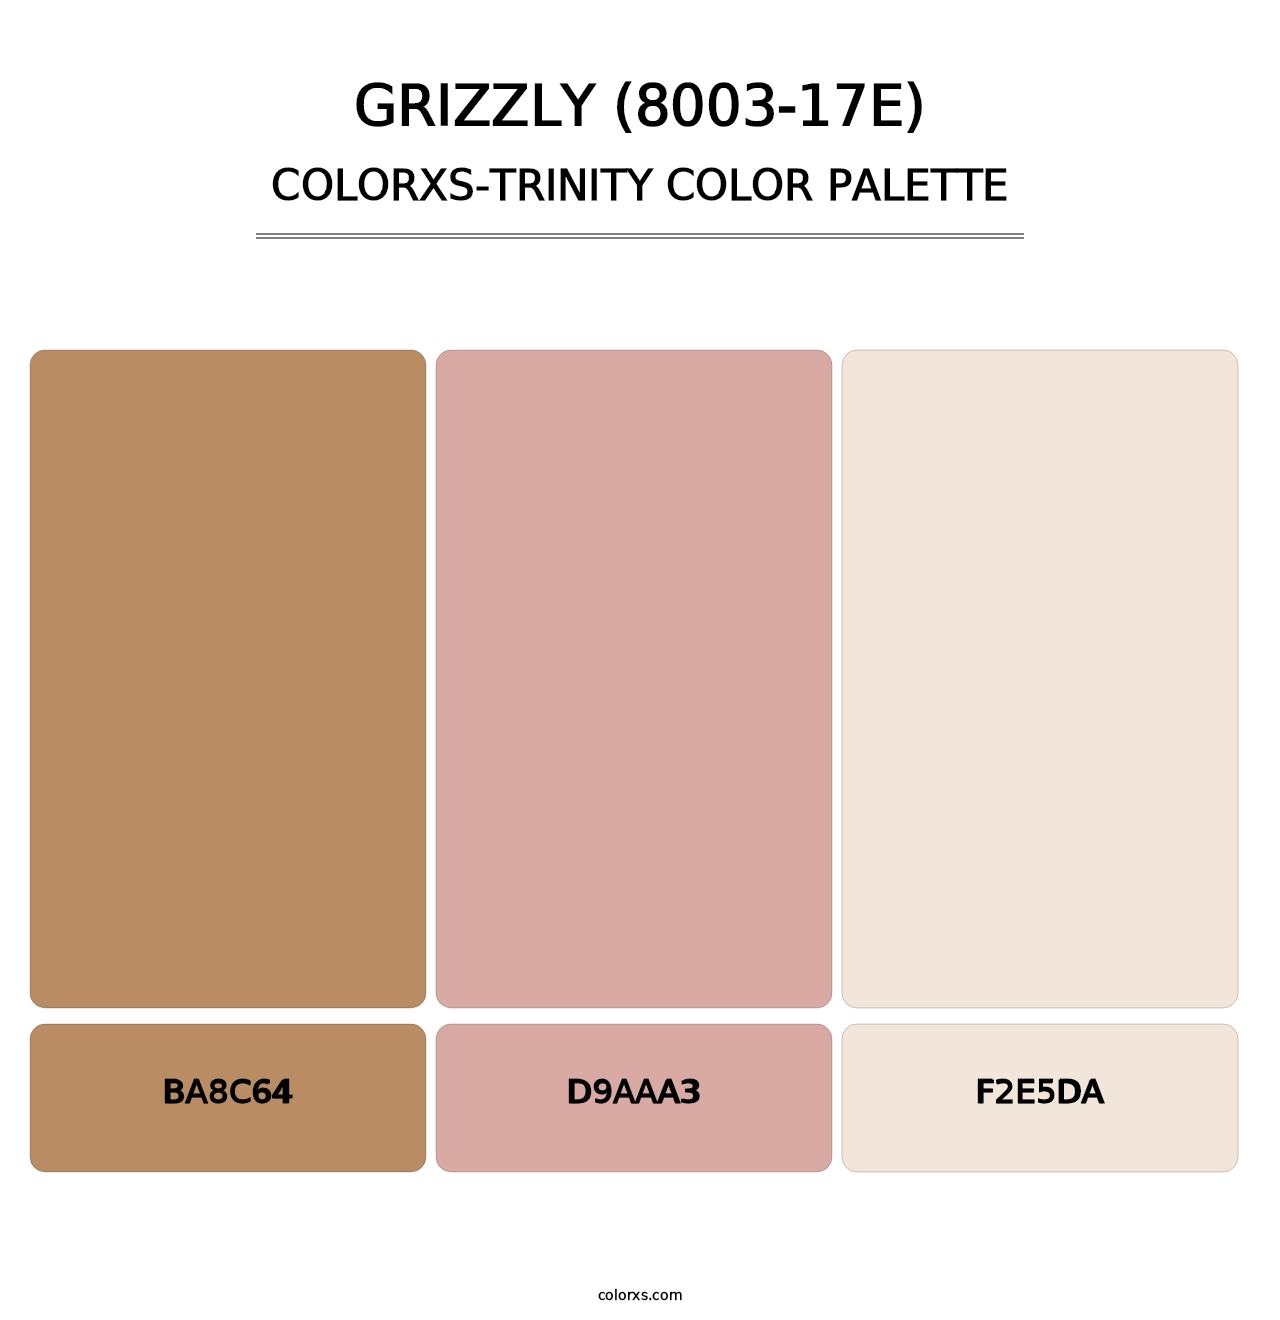 Grizzly (8003-17E) - Colorxs Trinity Palette